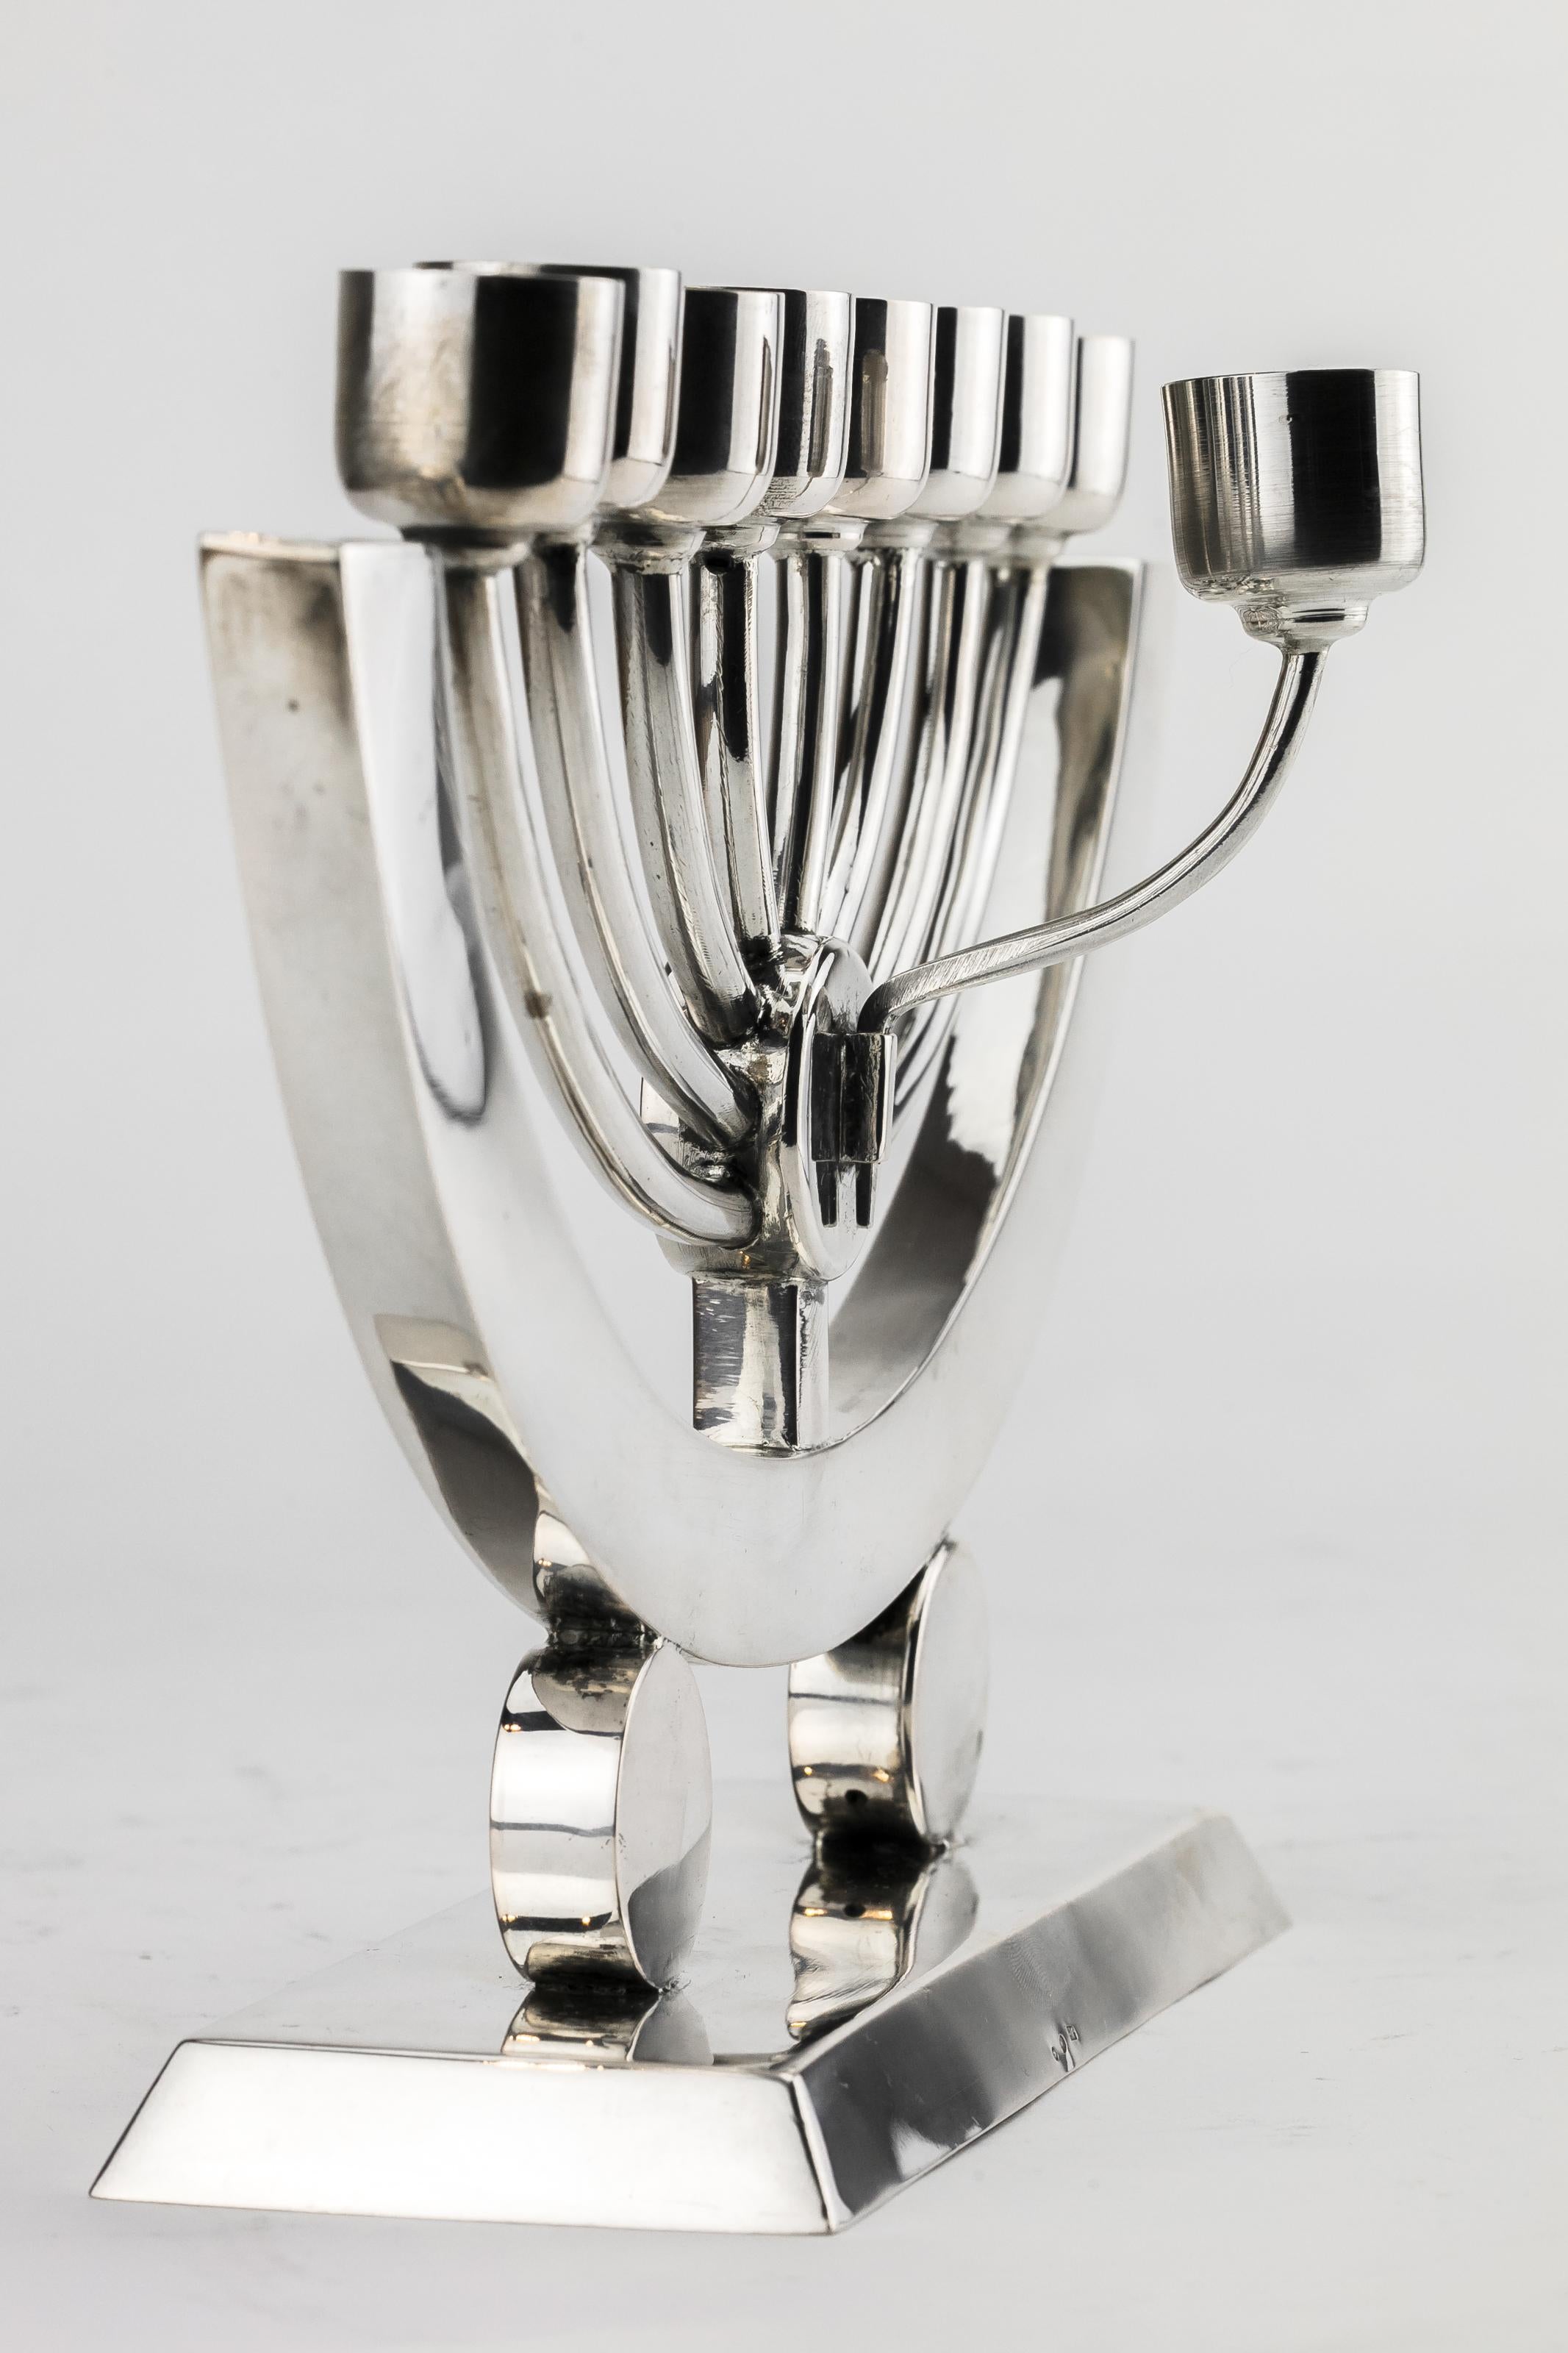 Handmade Art Deco silver Hanukkah Lamp Menorah, Krakow, Poland, circa 1920.
On rectangular base with two sphere supports that connect to a C-shaped main body. With eight oil receptacles and original servant lamp. Marked with maker's mark for JB and